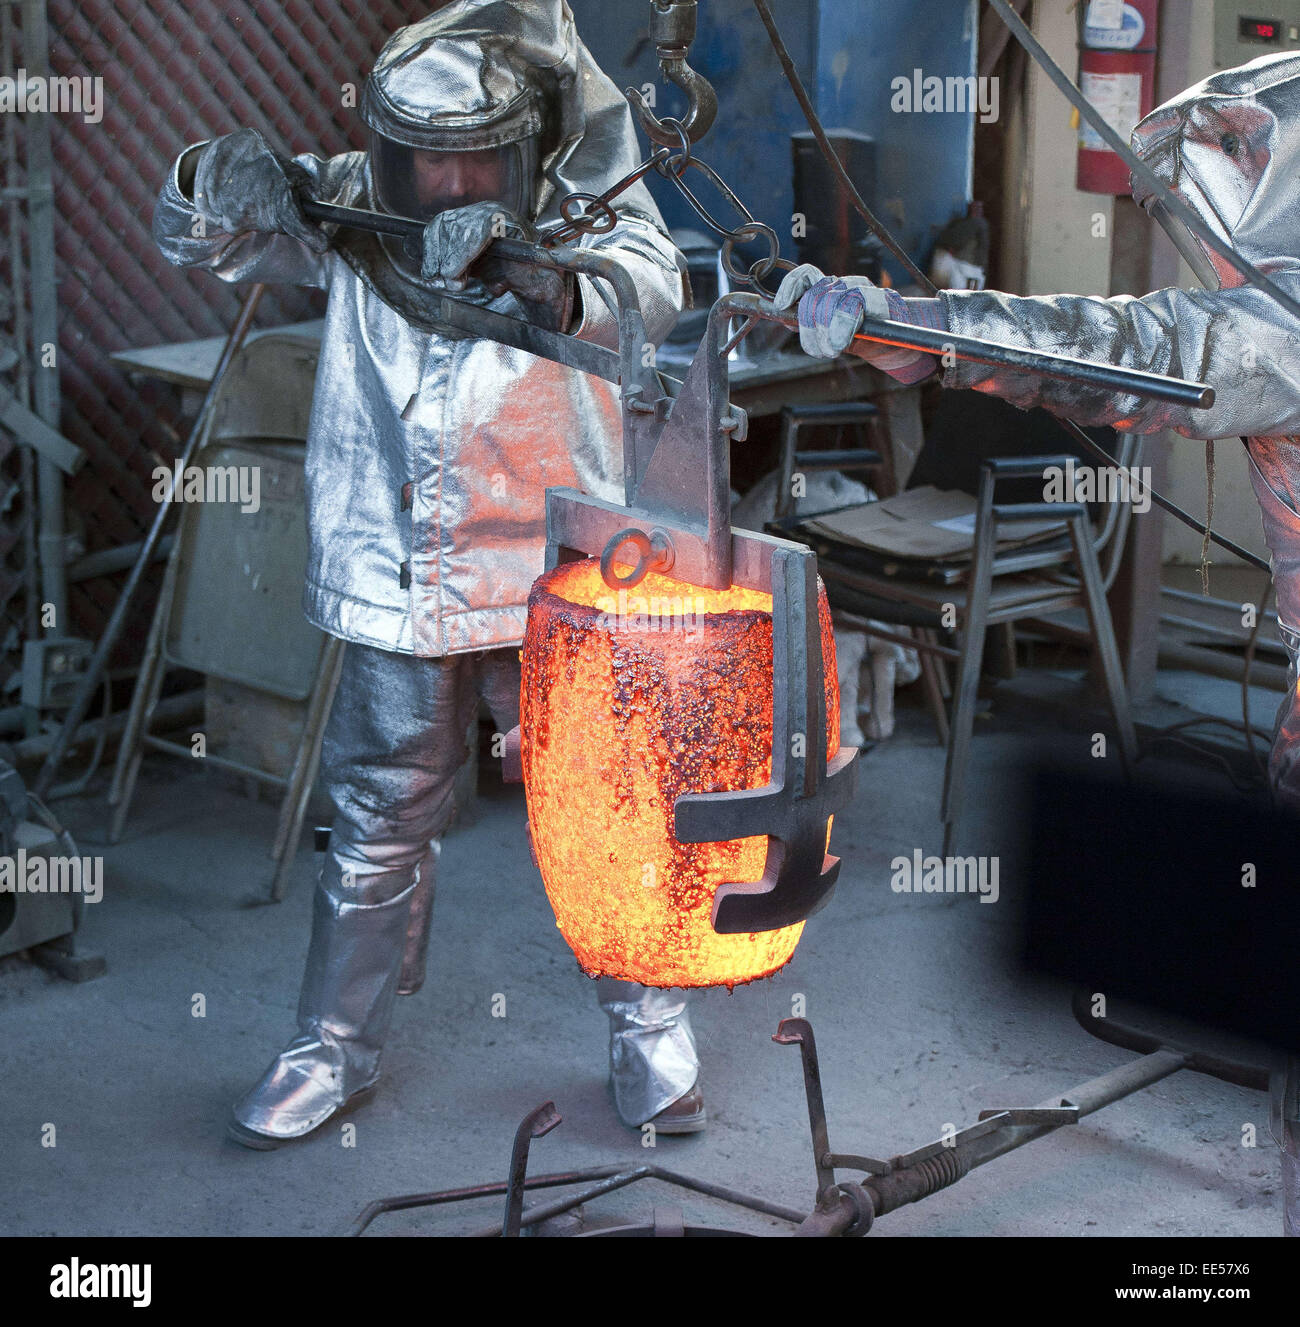 Burbank, California, USA. 13th Jan, 2015. American Fine Arts Foundry workers secure a red hot casting bucket before pouring molten bronze into molds for the 2015 21st Annual SAG Awards.The bronze molded awards for the 2015 Annual Screen Actor's Guild Awards were cast at the American Fine Arts Foundry in Burbank on Tuesday morning. © David Bro/ZUMA Wire/Alamy Live News Stock Photo